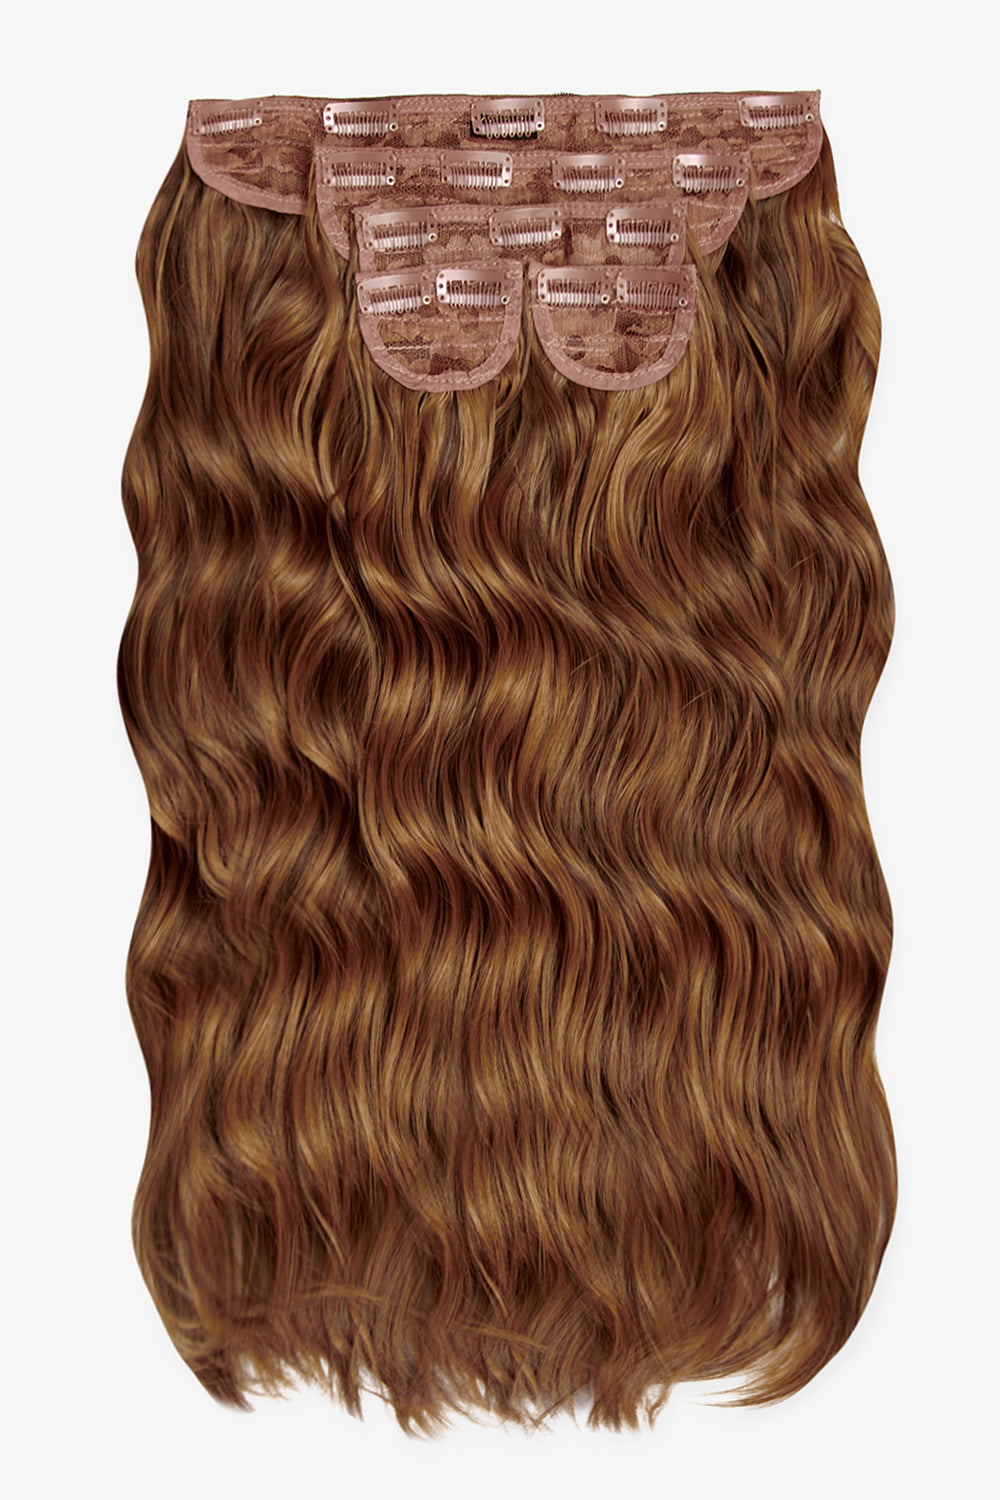 Super Thick 22" 5 Piece Brushed Out Wave Clip in Hair Extensions + Hair Care Bundle - Toffee Brown